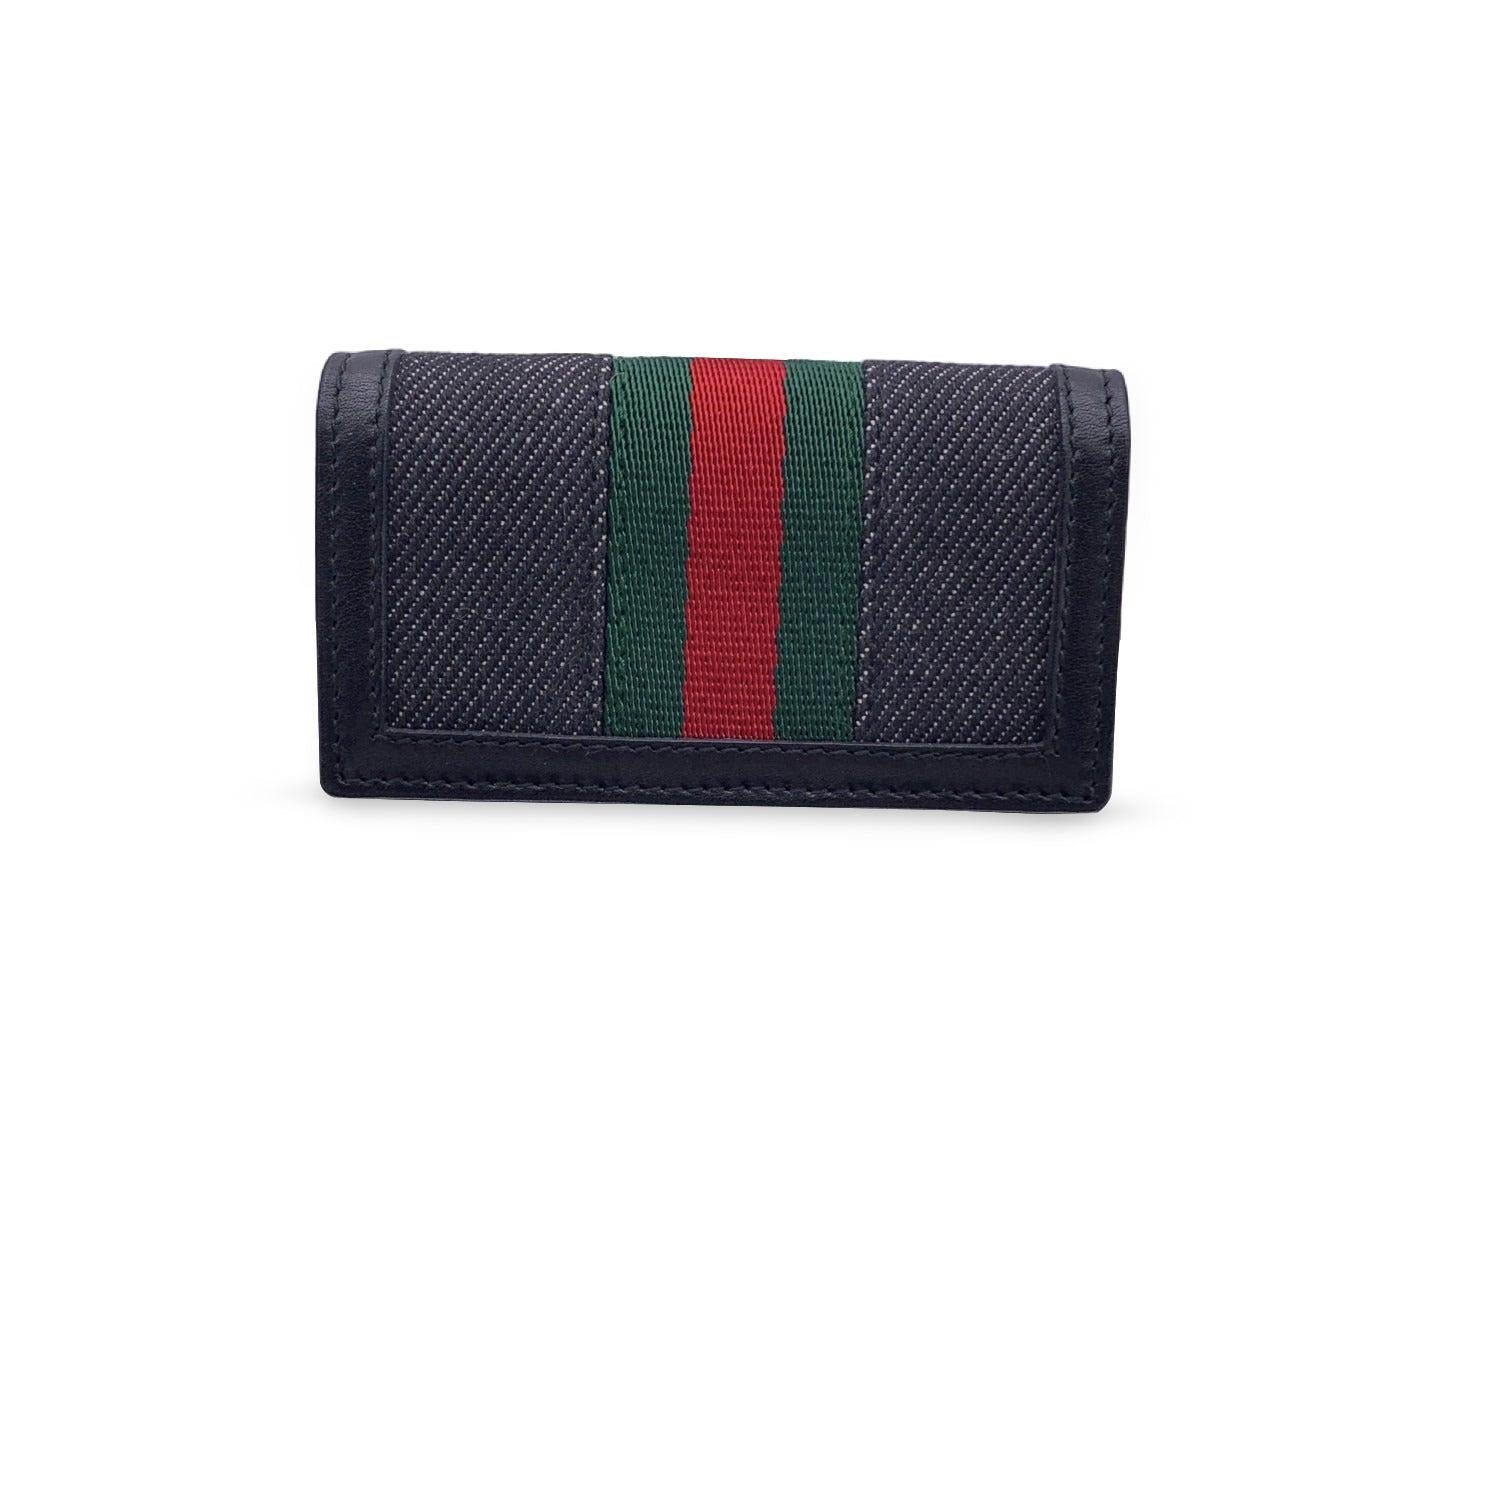 Gucci Black Denim Canvas and Leather Web 6 Key Case Holder Pouch In Excellent Condition For Sale In Rome, Rome